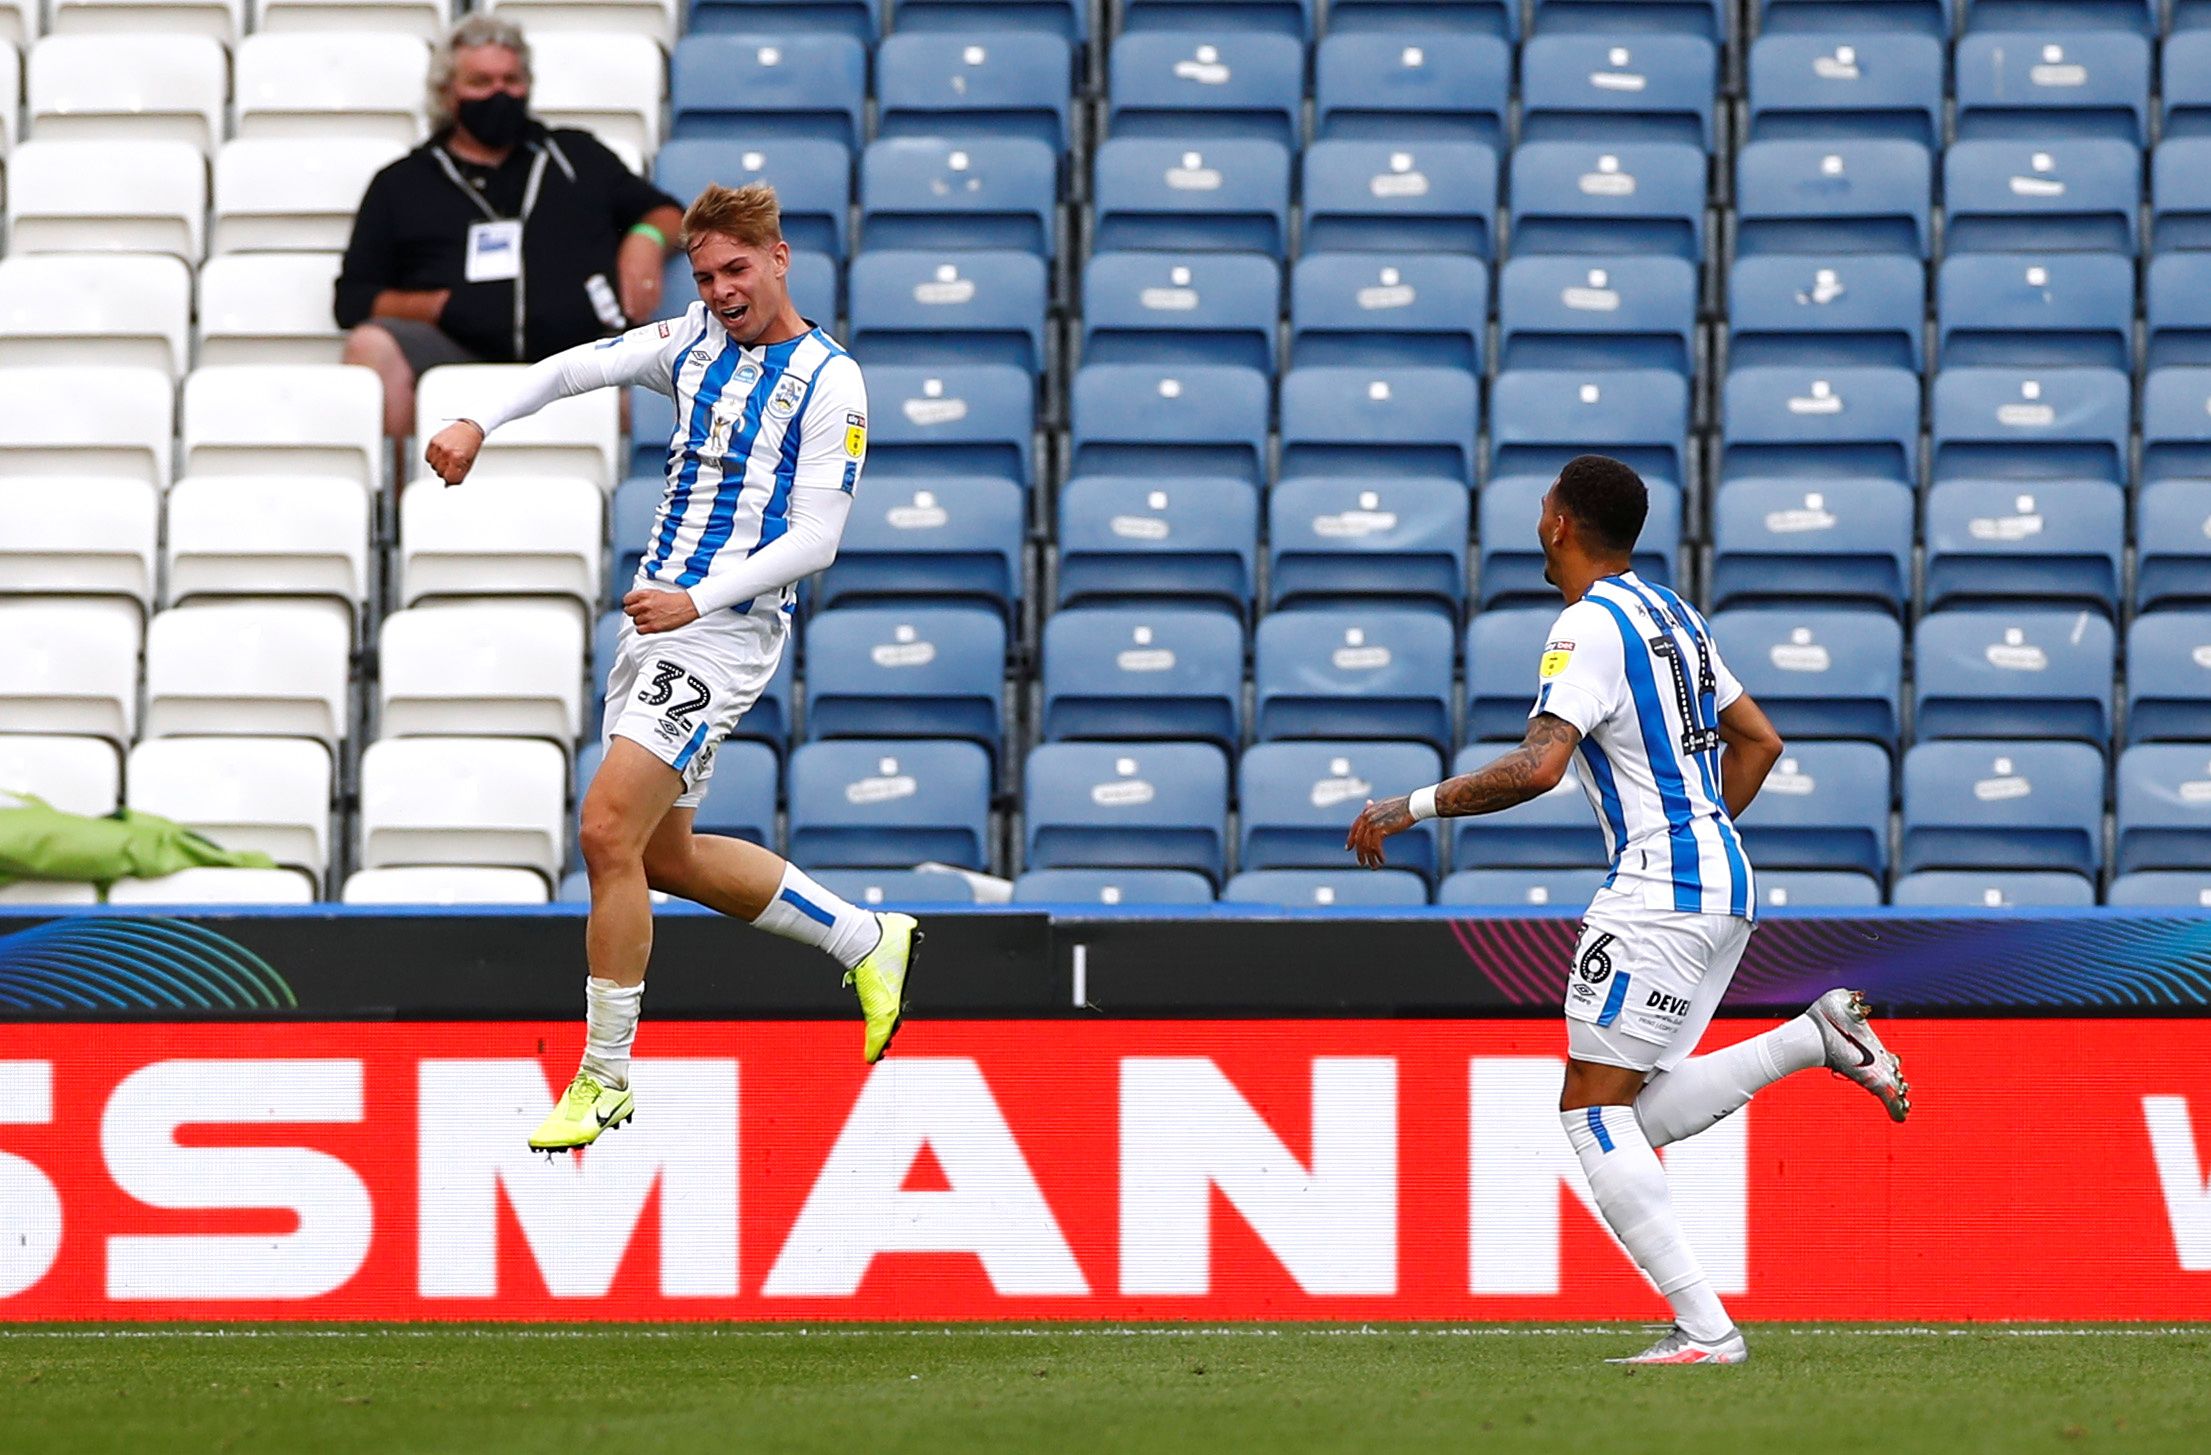 Soccer Football - Championship - Huddersfield Town v West Bromwich Albion - John Smith's Stadium, Huddersfield, Britain - July 17, 2020   Huddersfield Town's Kian Harratt celebrates scoring their second goal   Action Images/Jason Cairnduff    EDITORIAL USE ONLY. No use with unauthorized audio, video, data, fixture lists, club/league logos or "live" services. Online in-match use limited to 75 images, no video emulation. No use in betting, games or single club/league/player publications.  Please c